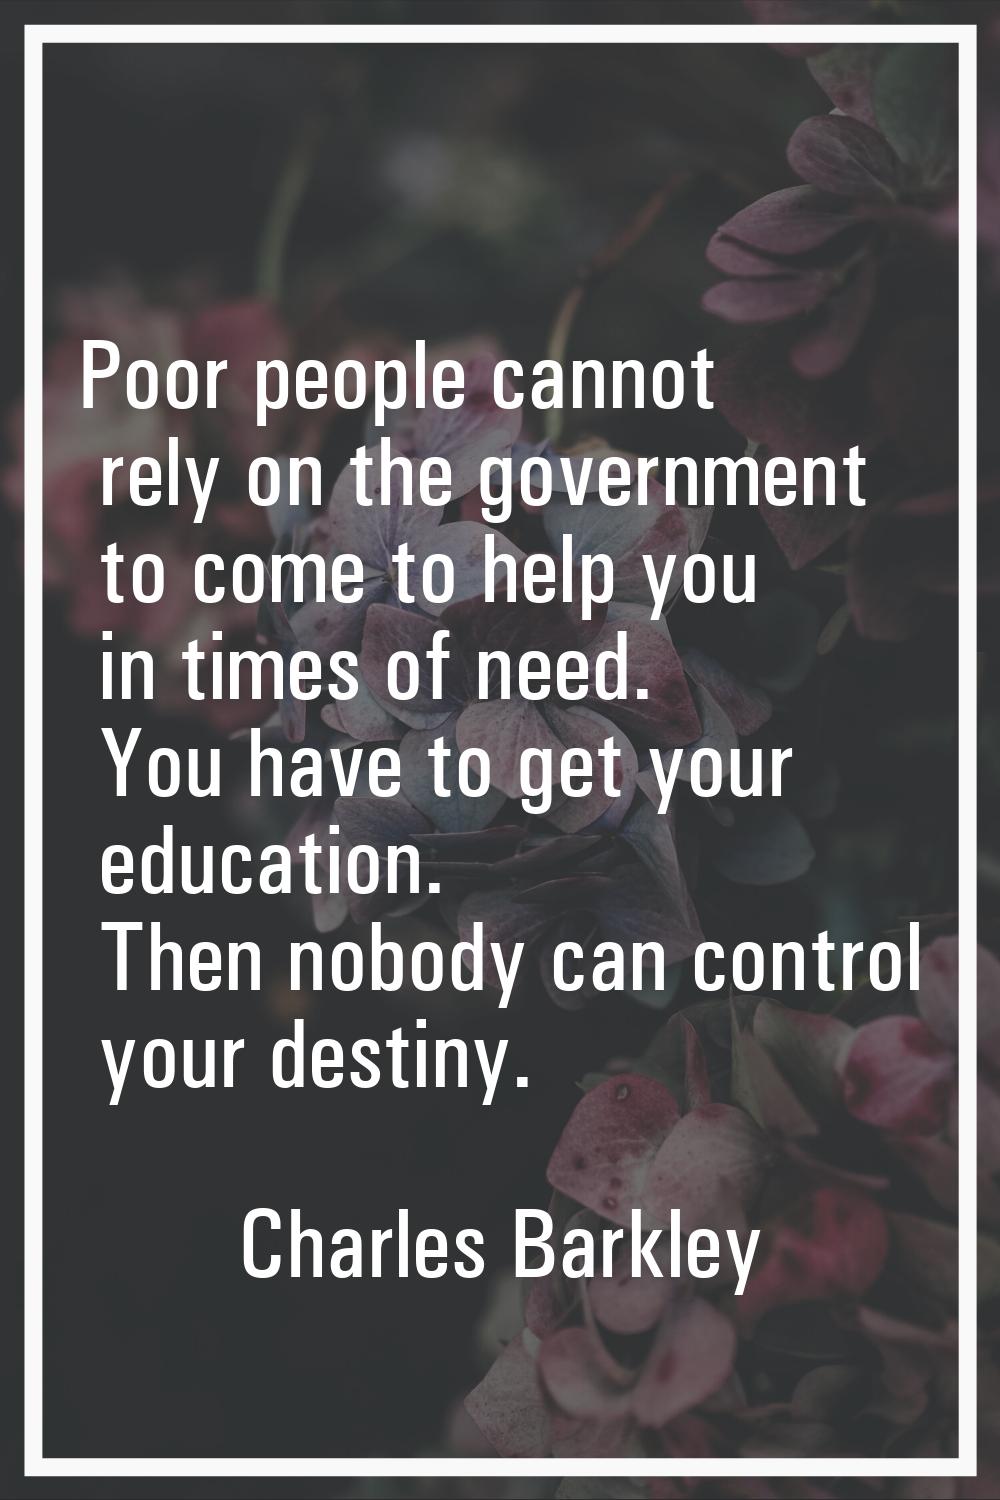 Poor people cannot rely on the government to come to help you in times of need. You have to get you